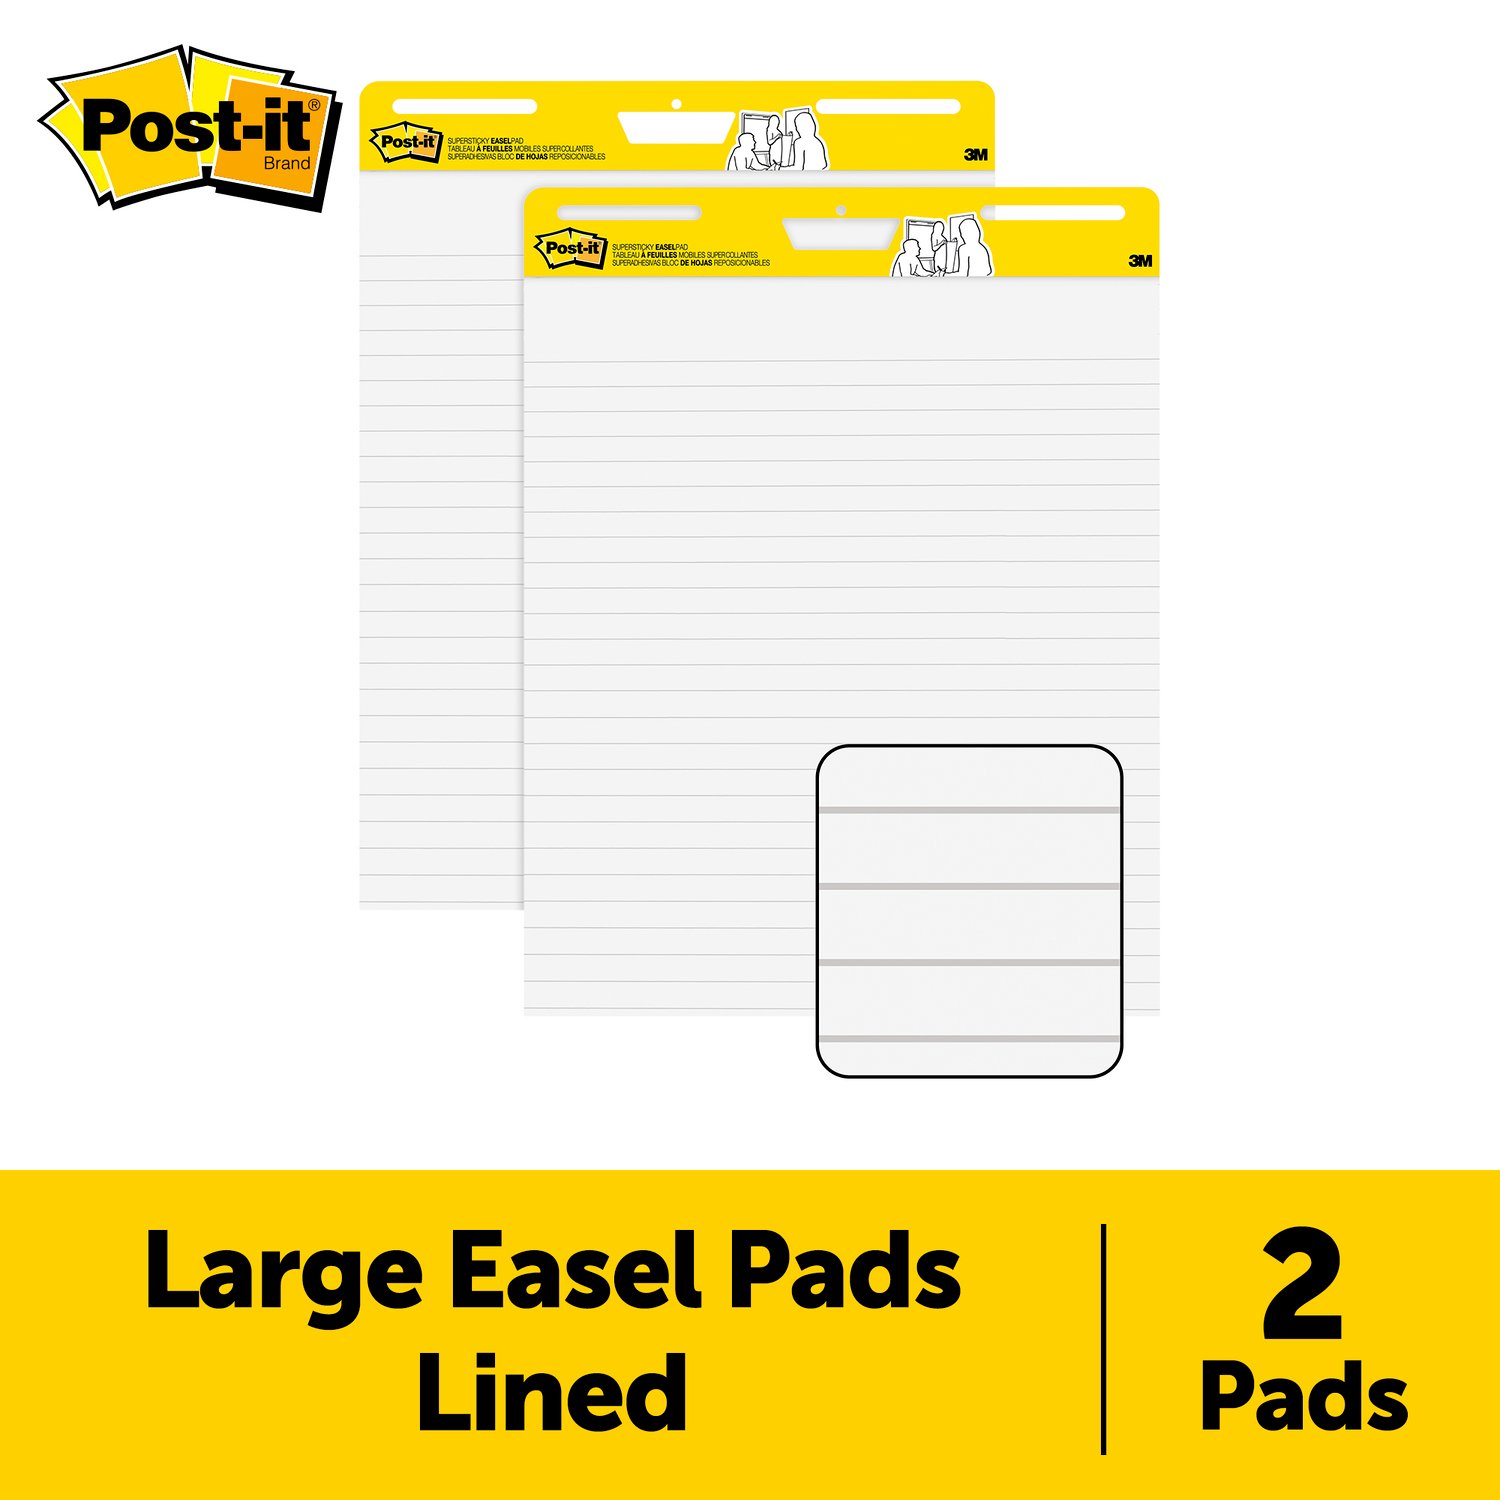 7100222692 - Post-it Super Sticky Easel Pad Lined 561WL VAD 2PK, 25 in x 30 in (63.5 cm x 76.2 cm), 30 Sheets-Pad, 2 Pads